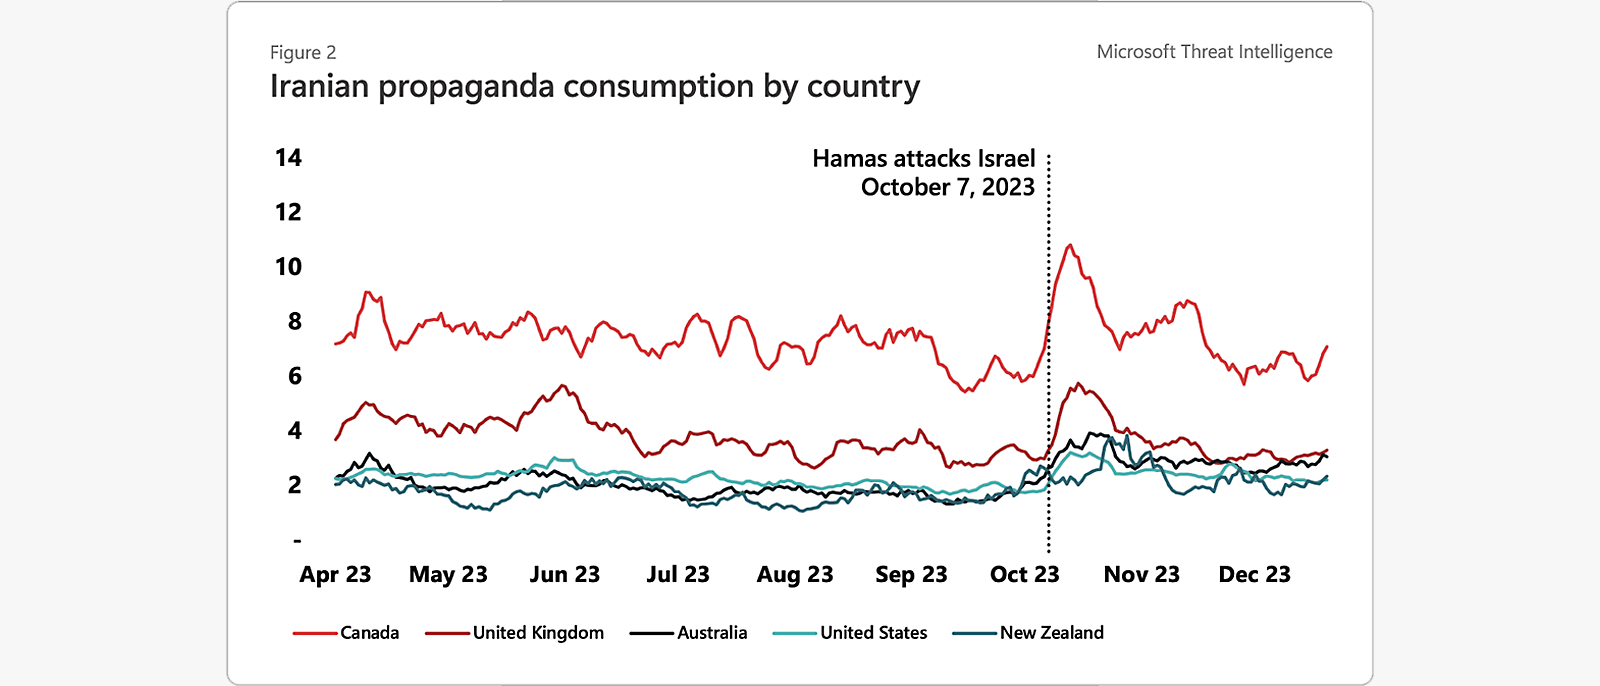 Figure 2: Microsoft Threat Intelligence - Iranian propaganda consumption by country, Hamas attacks on Israel. Graph showing activity from April to December 2023.